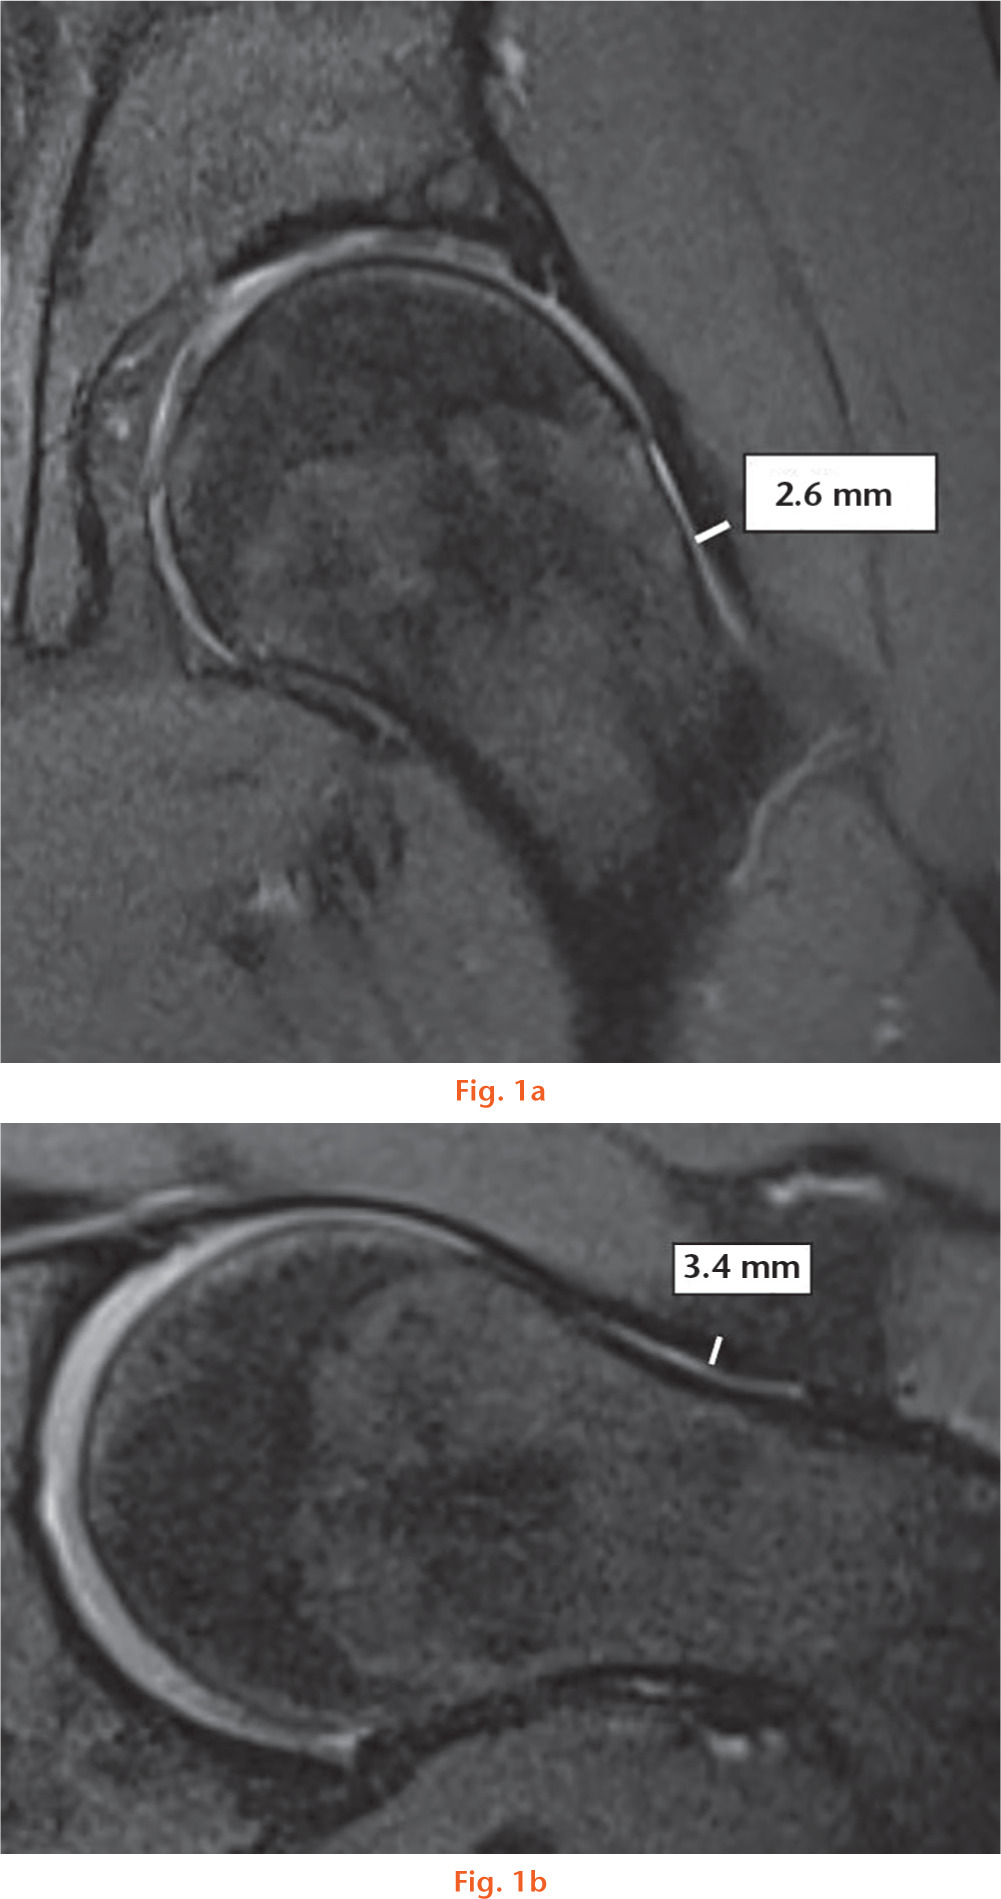  
          Measurement of the (a) superior (12:00) capsule thickness on an oblique coronal MRI image of an asymptomatic control subject and (b) anterior (3:00) capsule thickness on an oblique axial MRI image of an asymptomatic control subject.
        